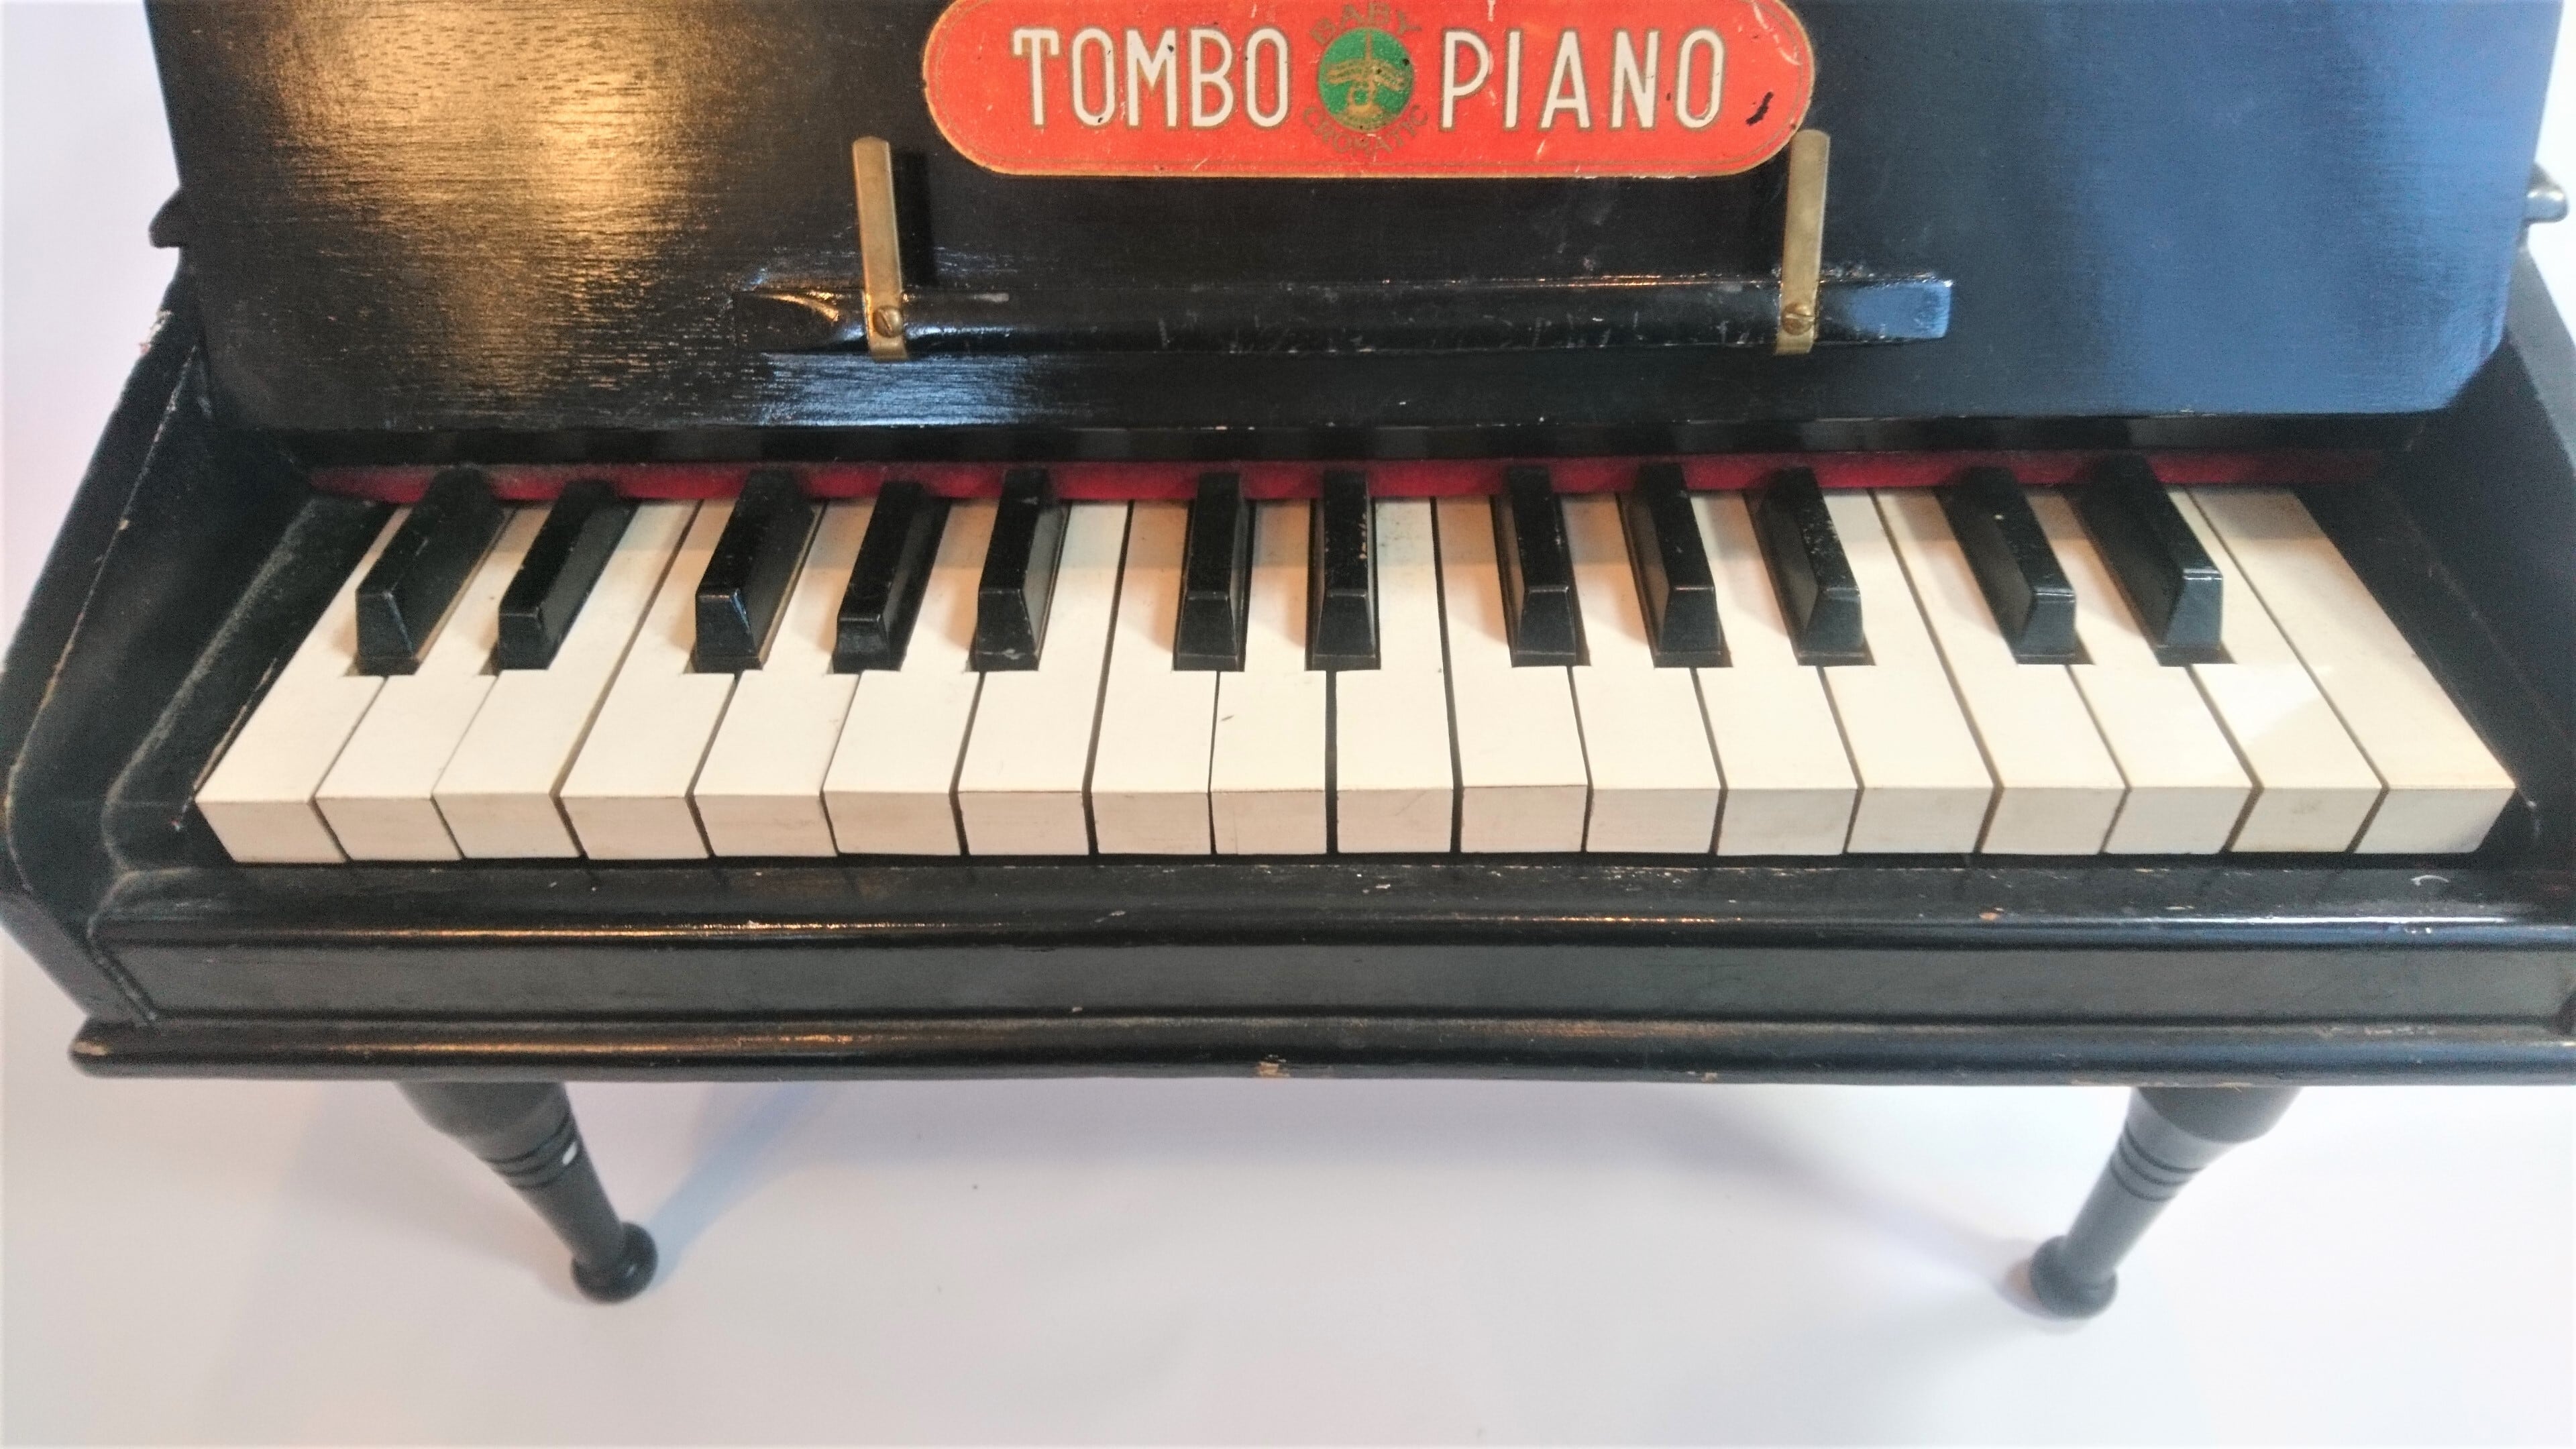 ［vintage］tomboトイピアノ30鍵盤 | おもちゃ楽器.com powered by BASE